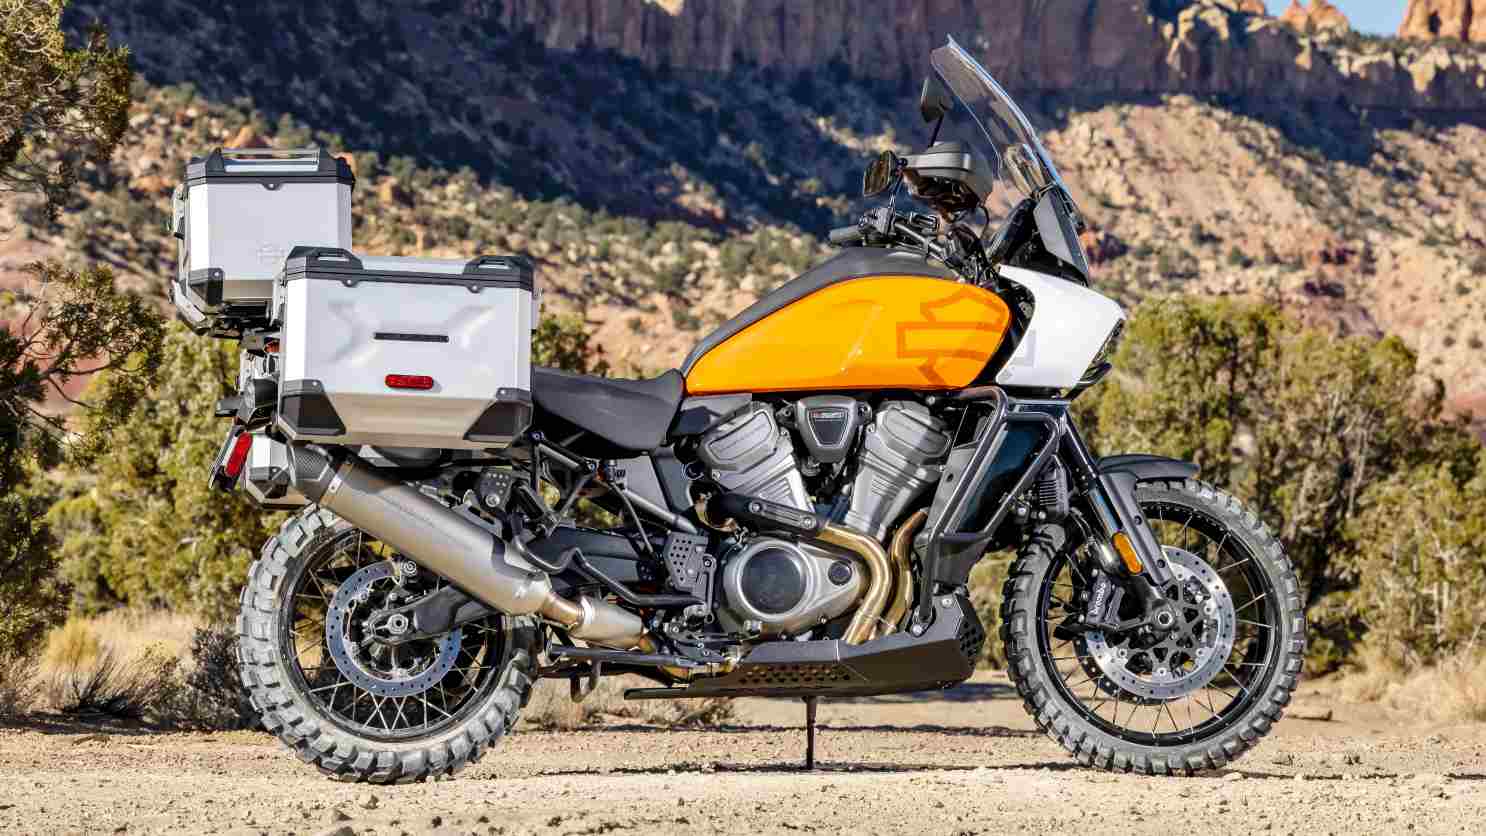 Harley Davidson Pan America 1250 Adventure Tourer Revealed In Full Set For India Launch In 2021 Technology News Firstpost